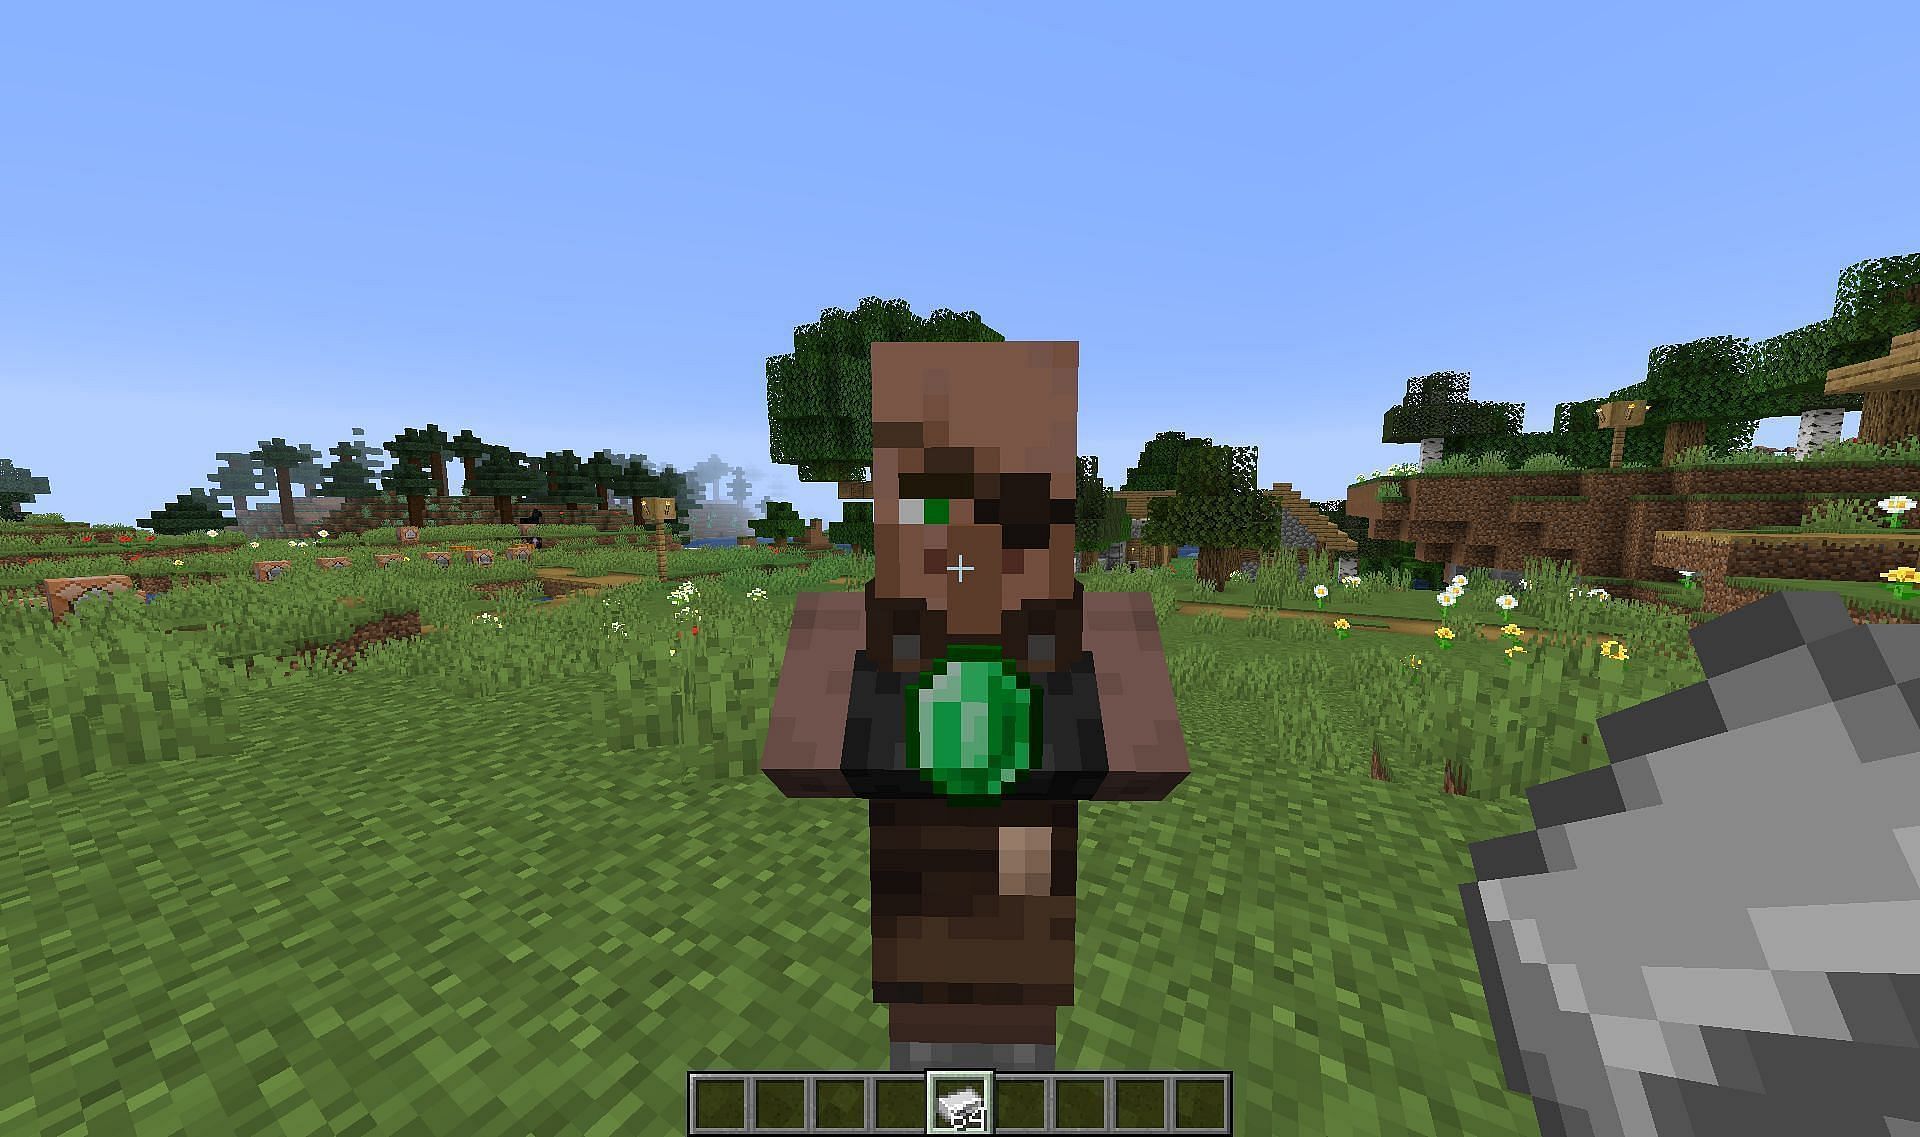 Villagers trade with emeralds (Image via Mojang)